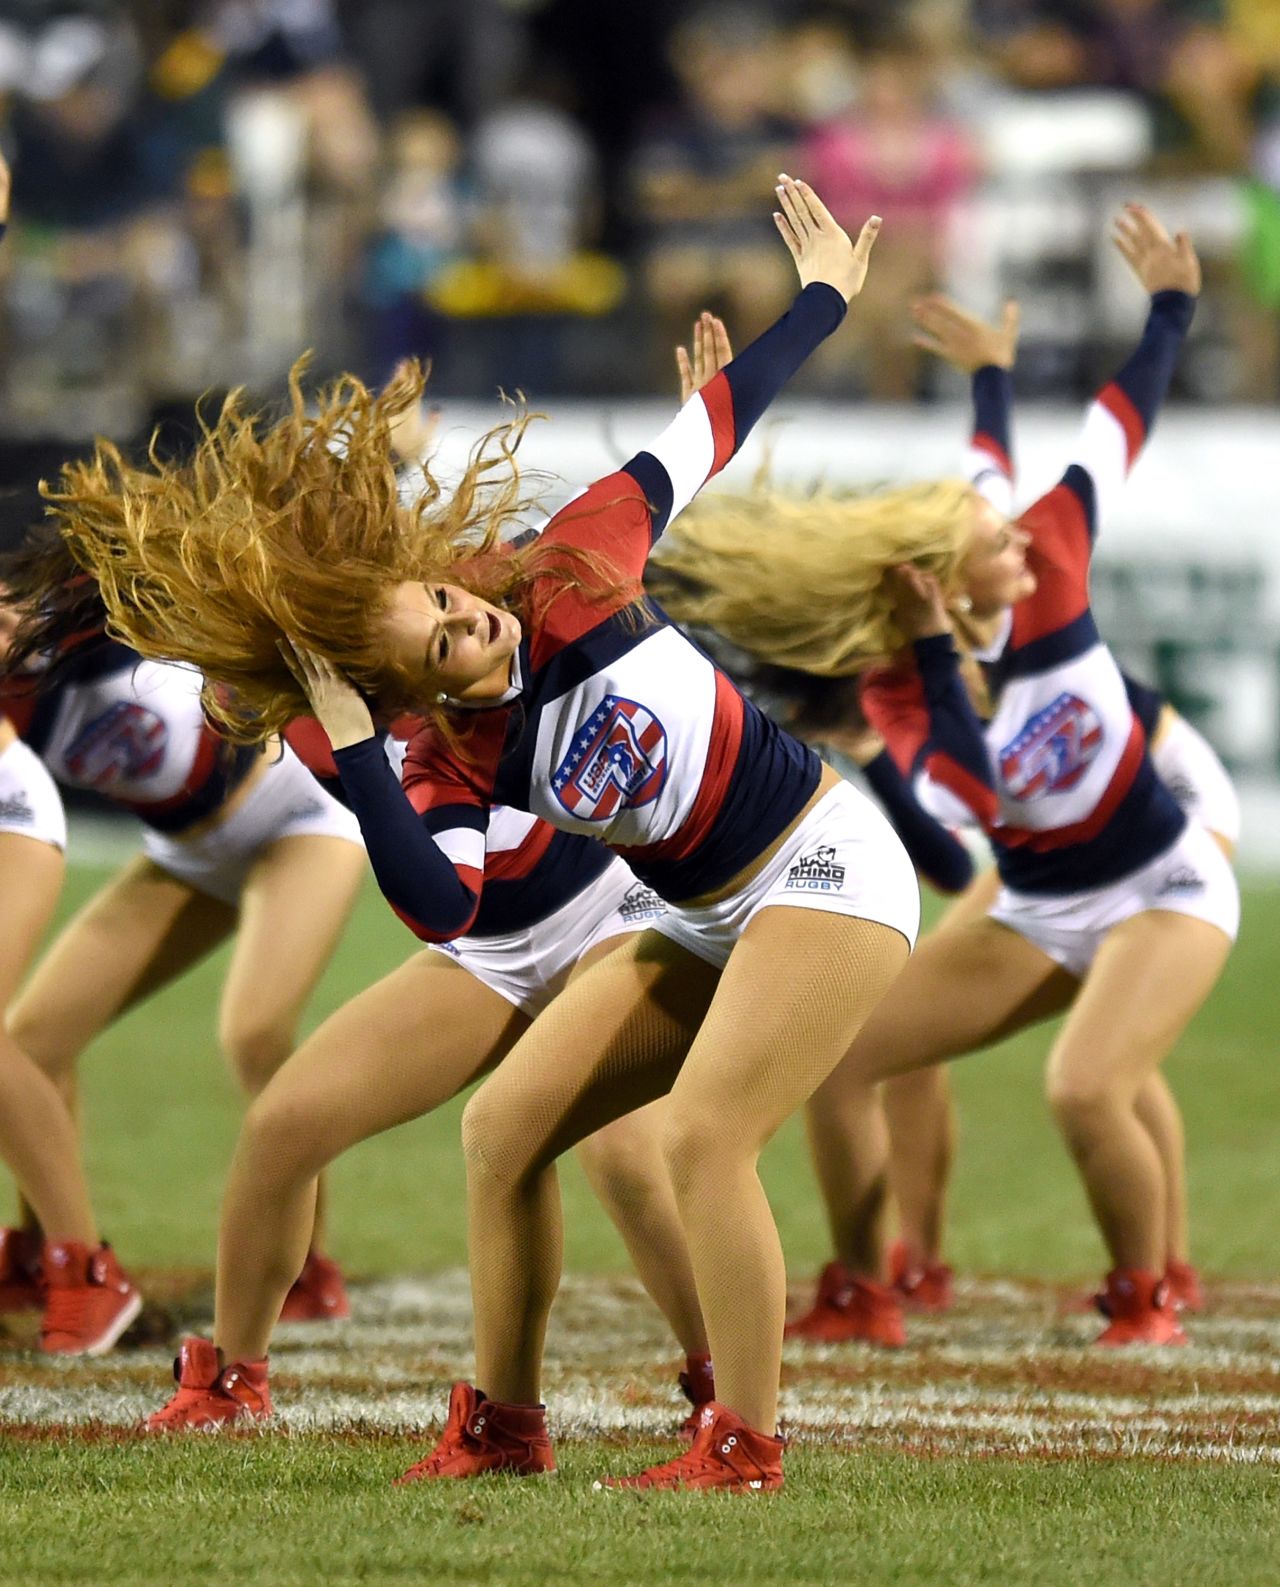 In common with rugby's US sports rivals, cheerleaders play a big part in the entertainment schedule at Vegas -- which over the years has included Cirque Du Soleil and fighter jets. Here members of the USA Sevens Sweethearts perform during the 2015 tournament.